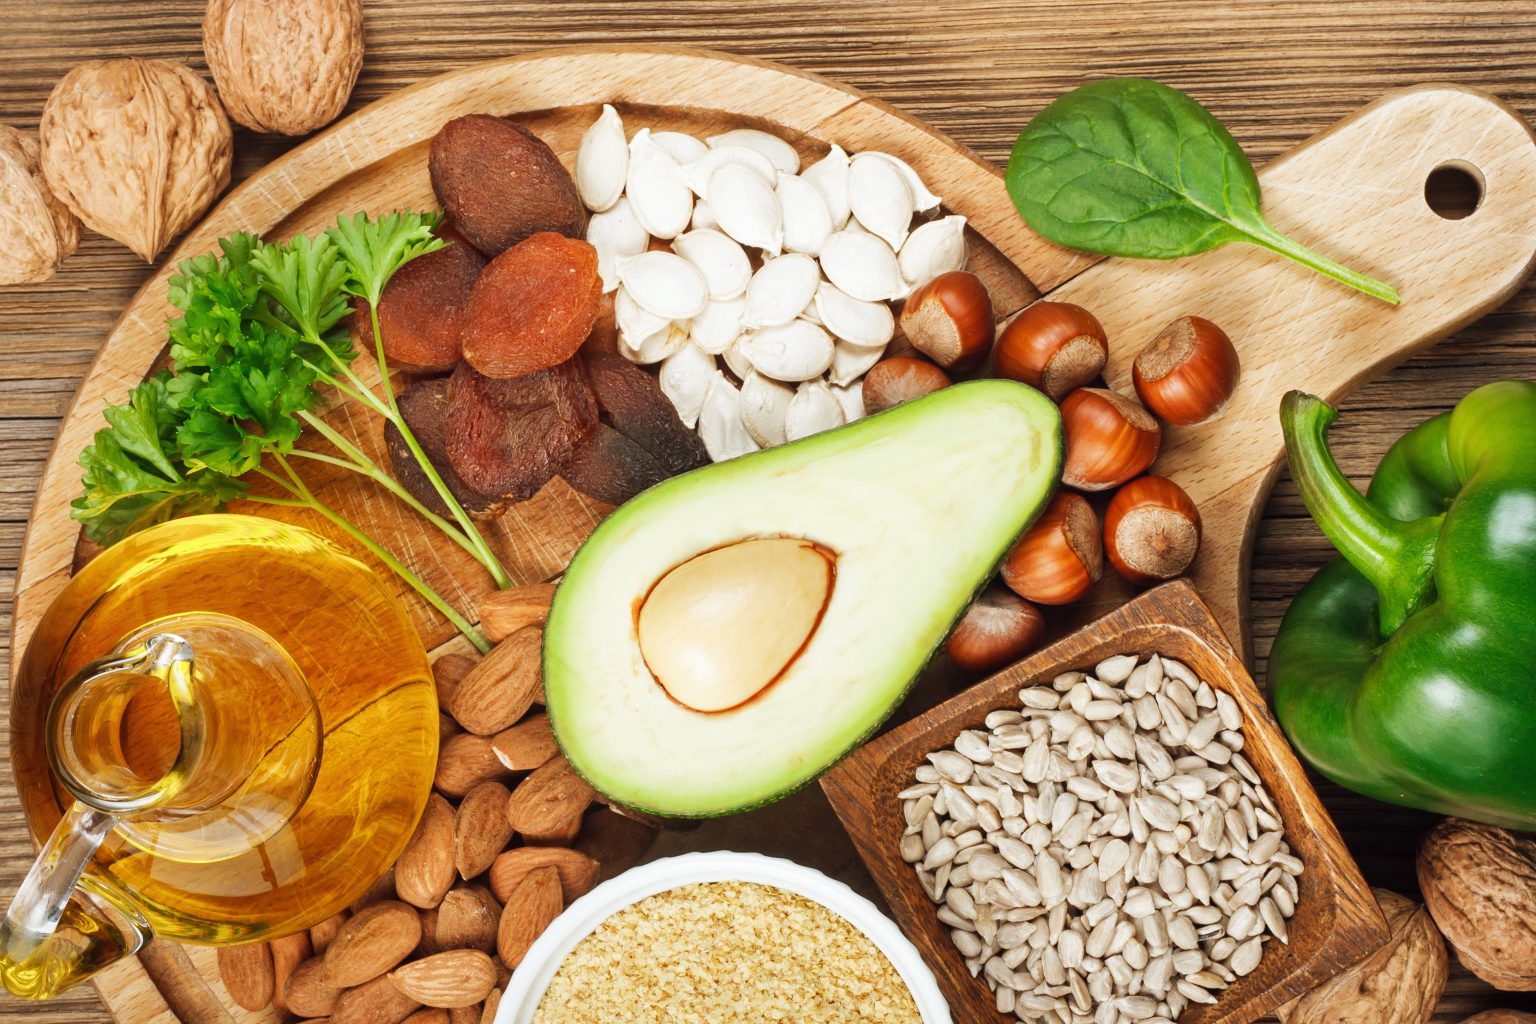 Importance and source of vitamin E